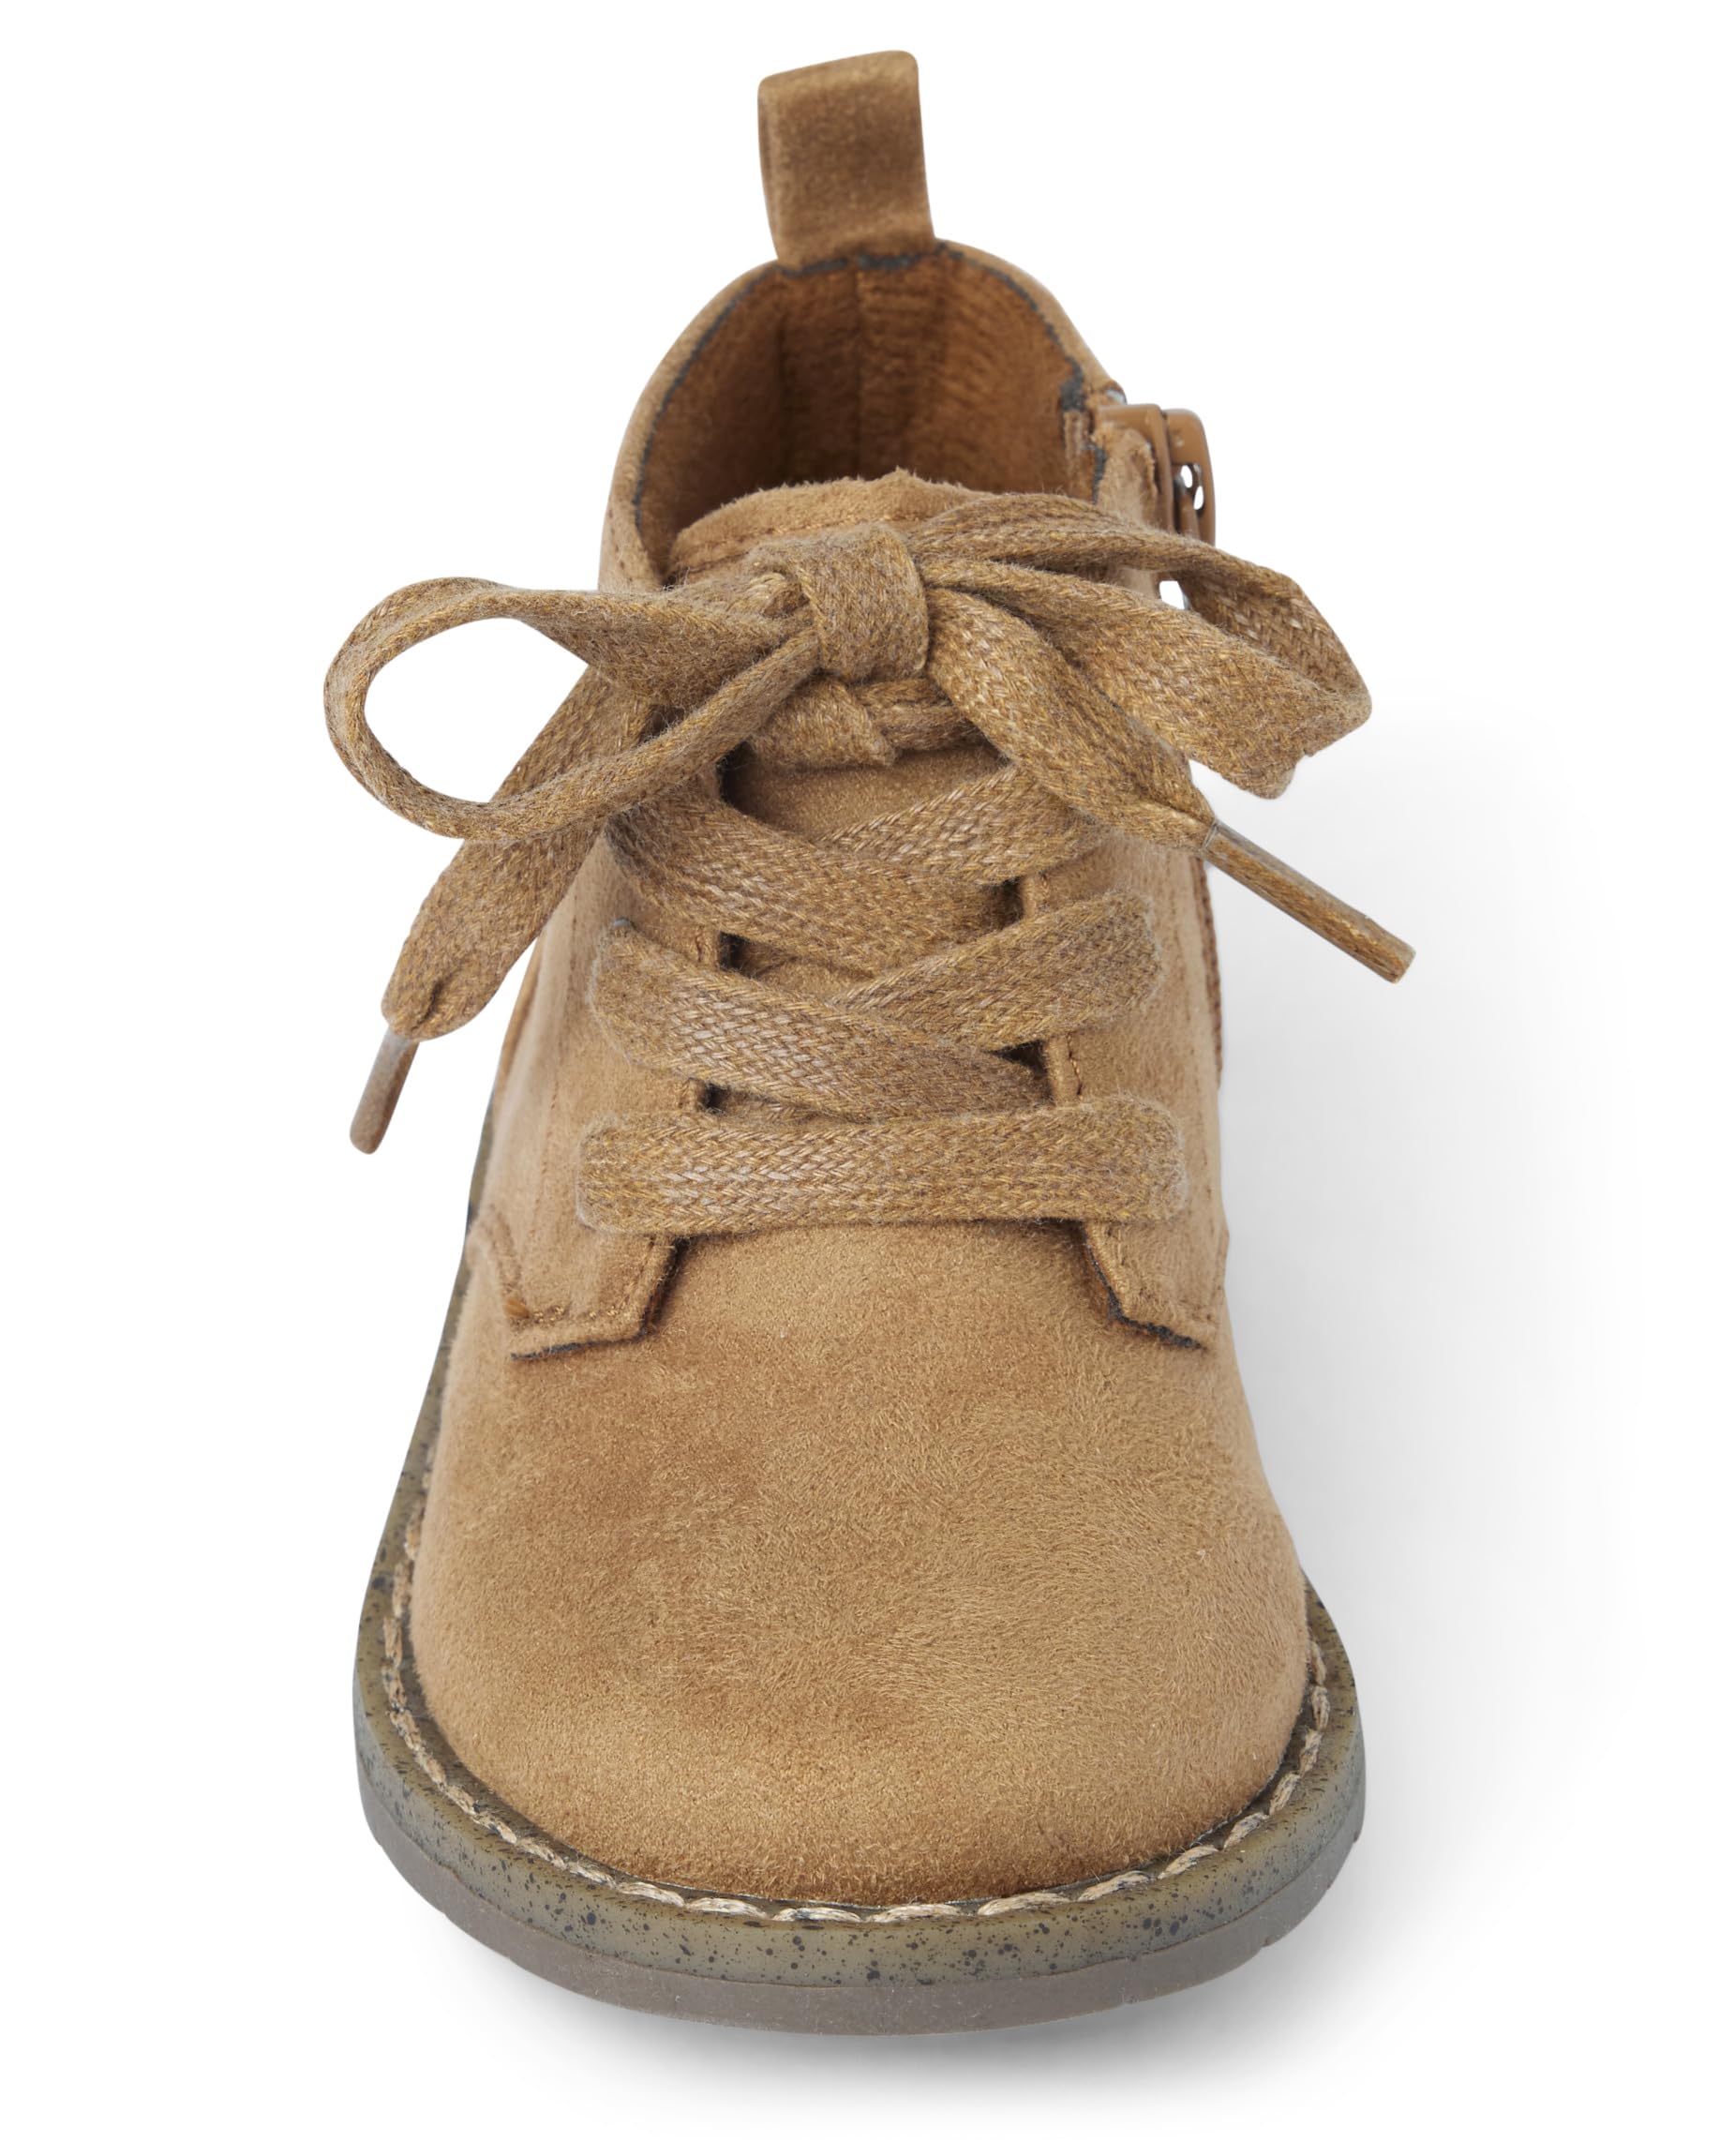 Gymboree Unisex-Child and Toddler Short Ankle Boots